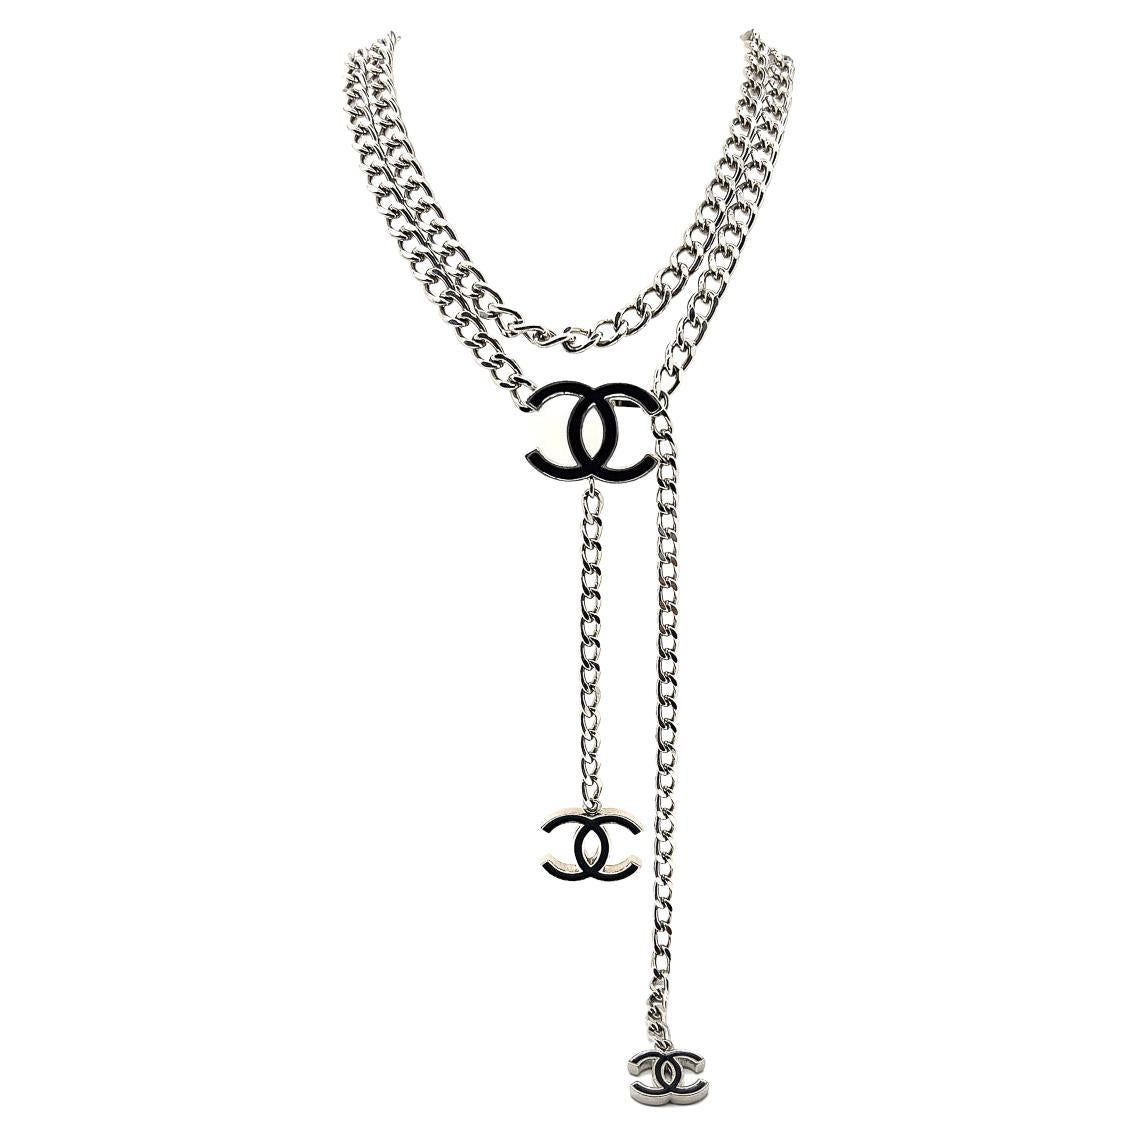 Vintage Chanel Double CC Chunky Chain Necklace 2004 For Sale